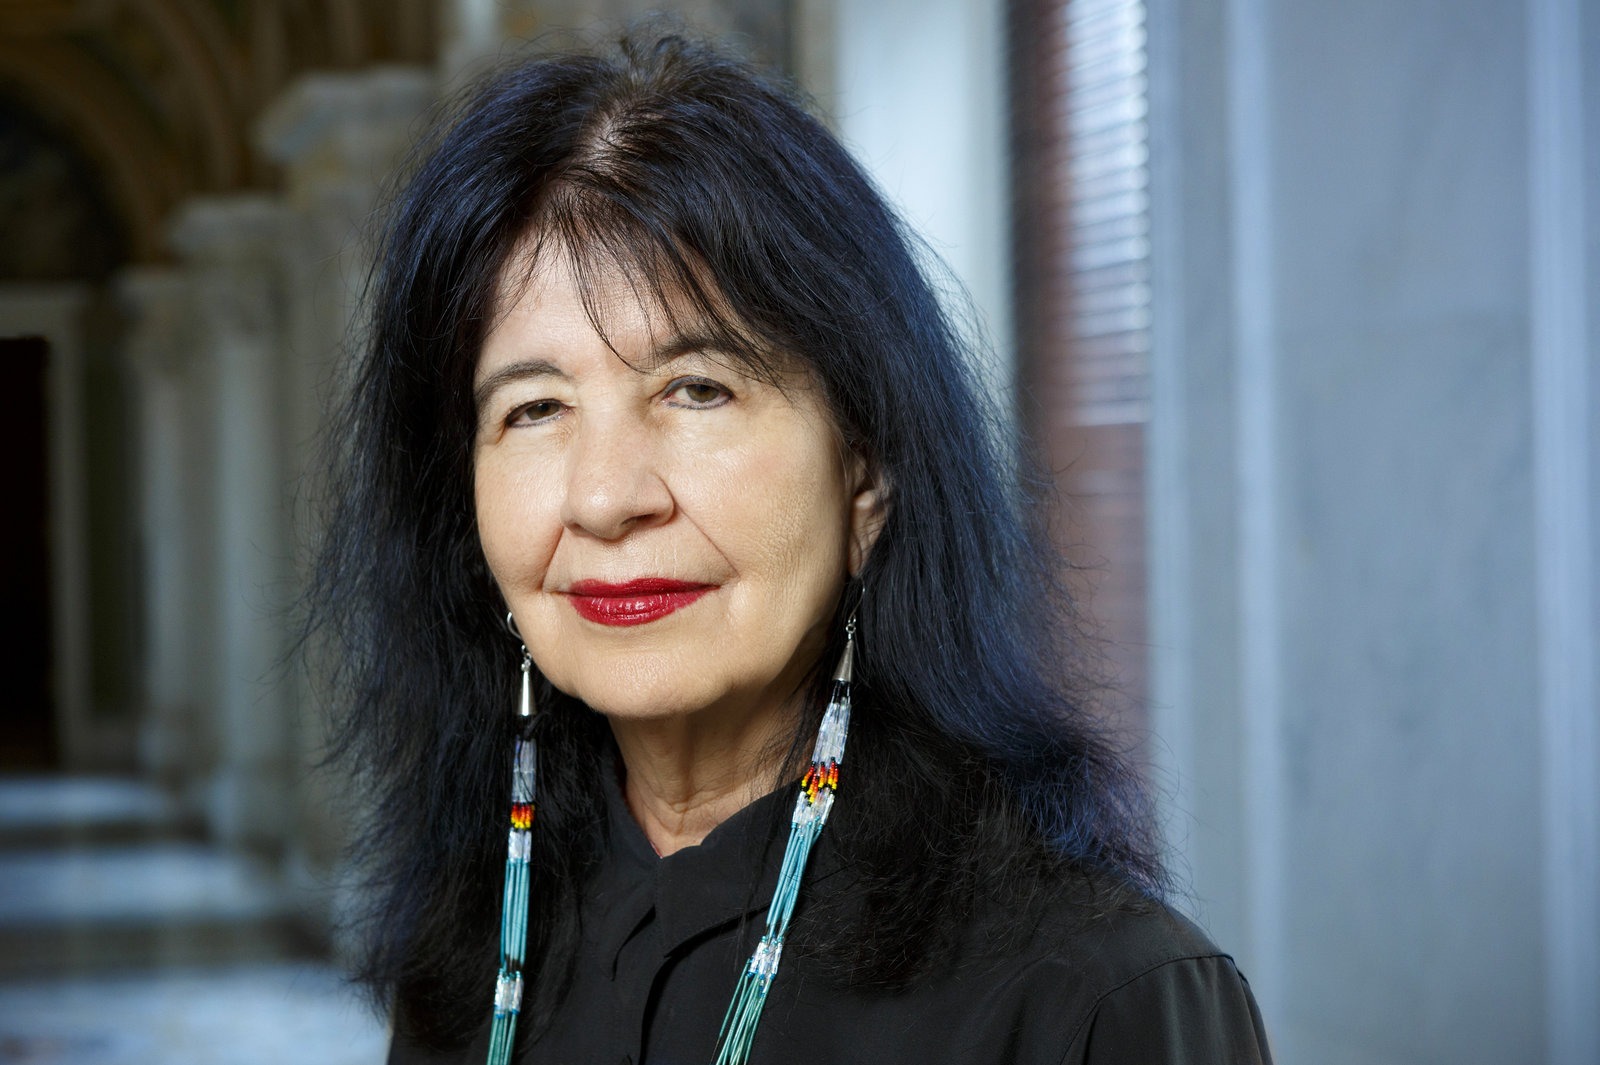 Joy Harjo will become the 23rd poet laureate of the United States, making her the first Native American to hold the position. Shawn Miller/Library of Congress